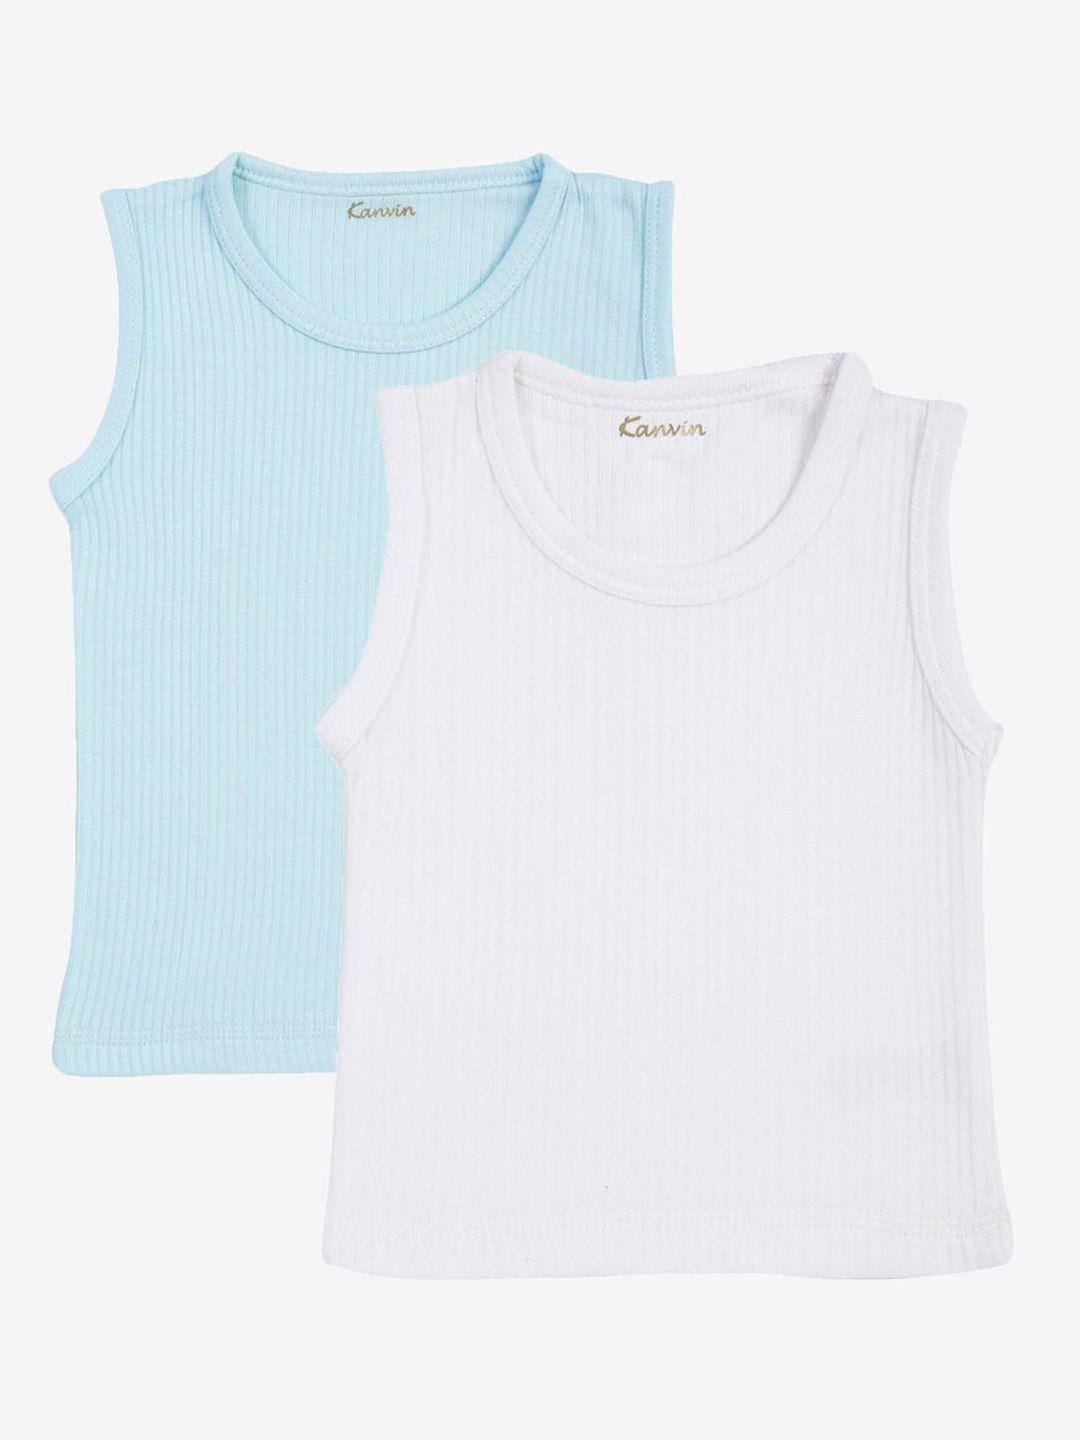 kanvin boys solid cotton  thermal tops